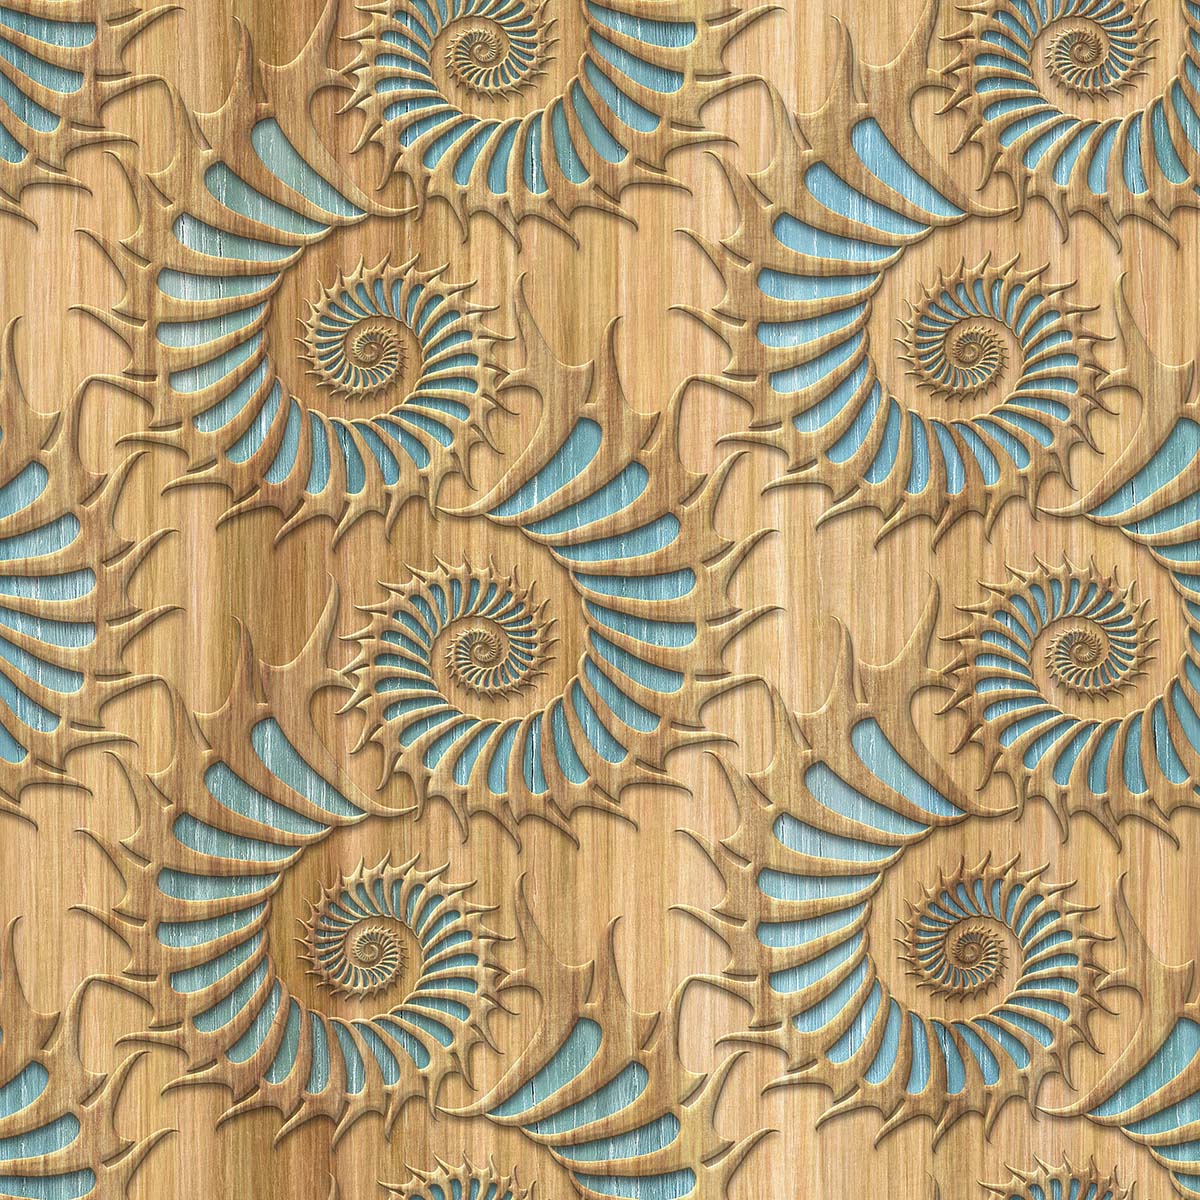 A wood panel with blue swirls